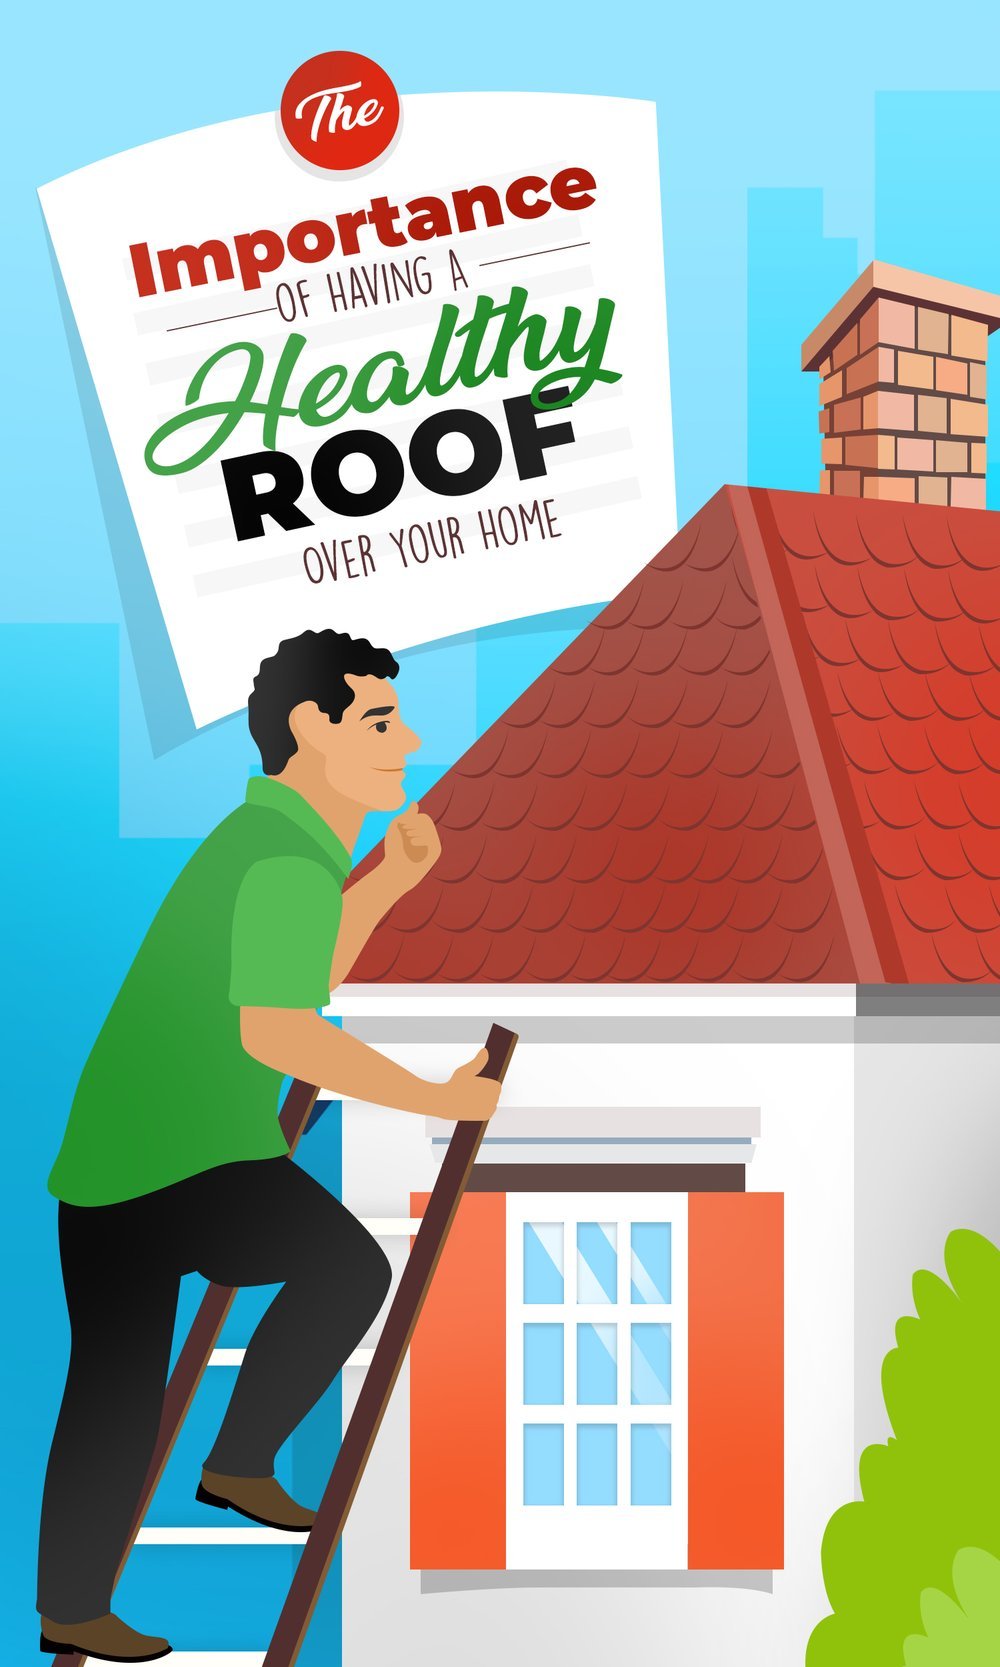 Don't Forget to Look Up! The Importance of Having A Healthy Roof Over Your Home